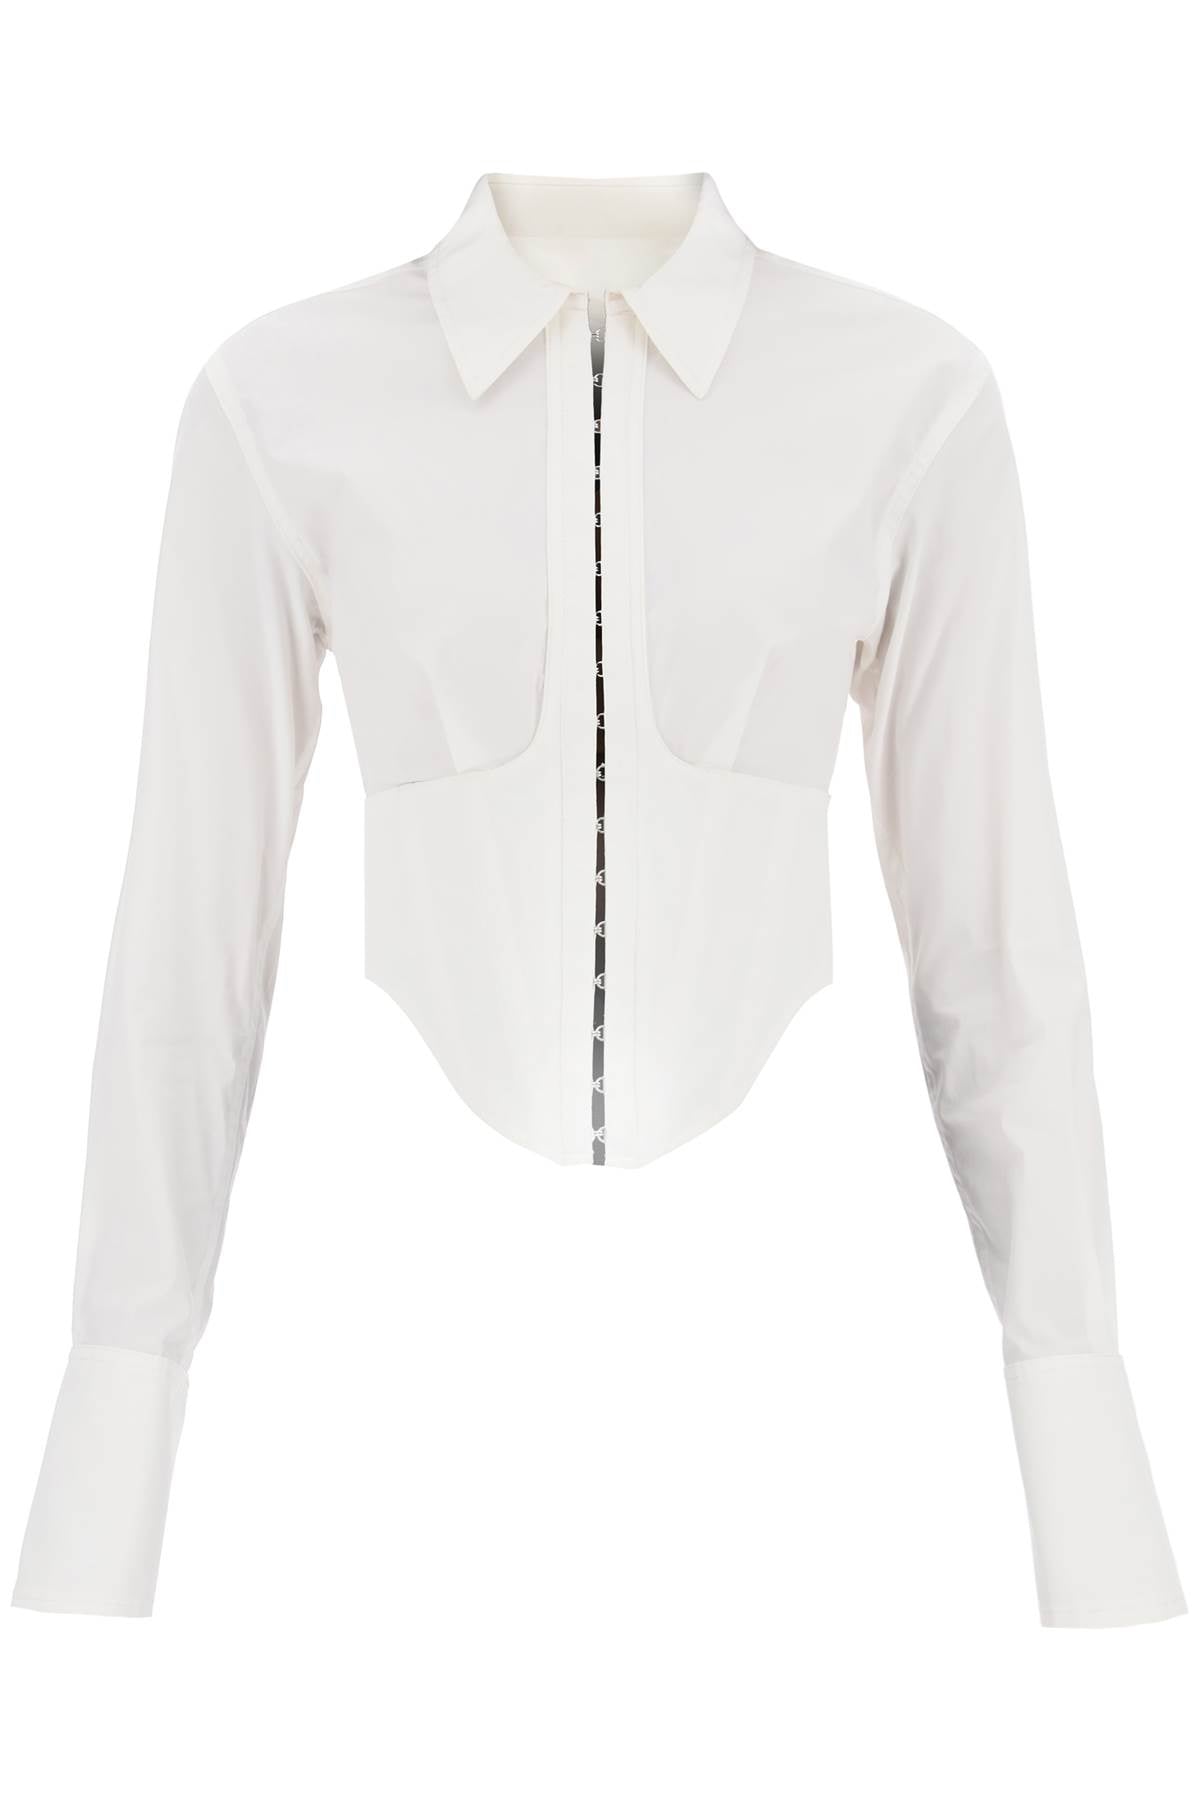 Dion lee cropped shirt with underbust corset-0